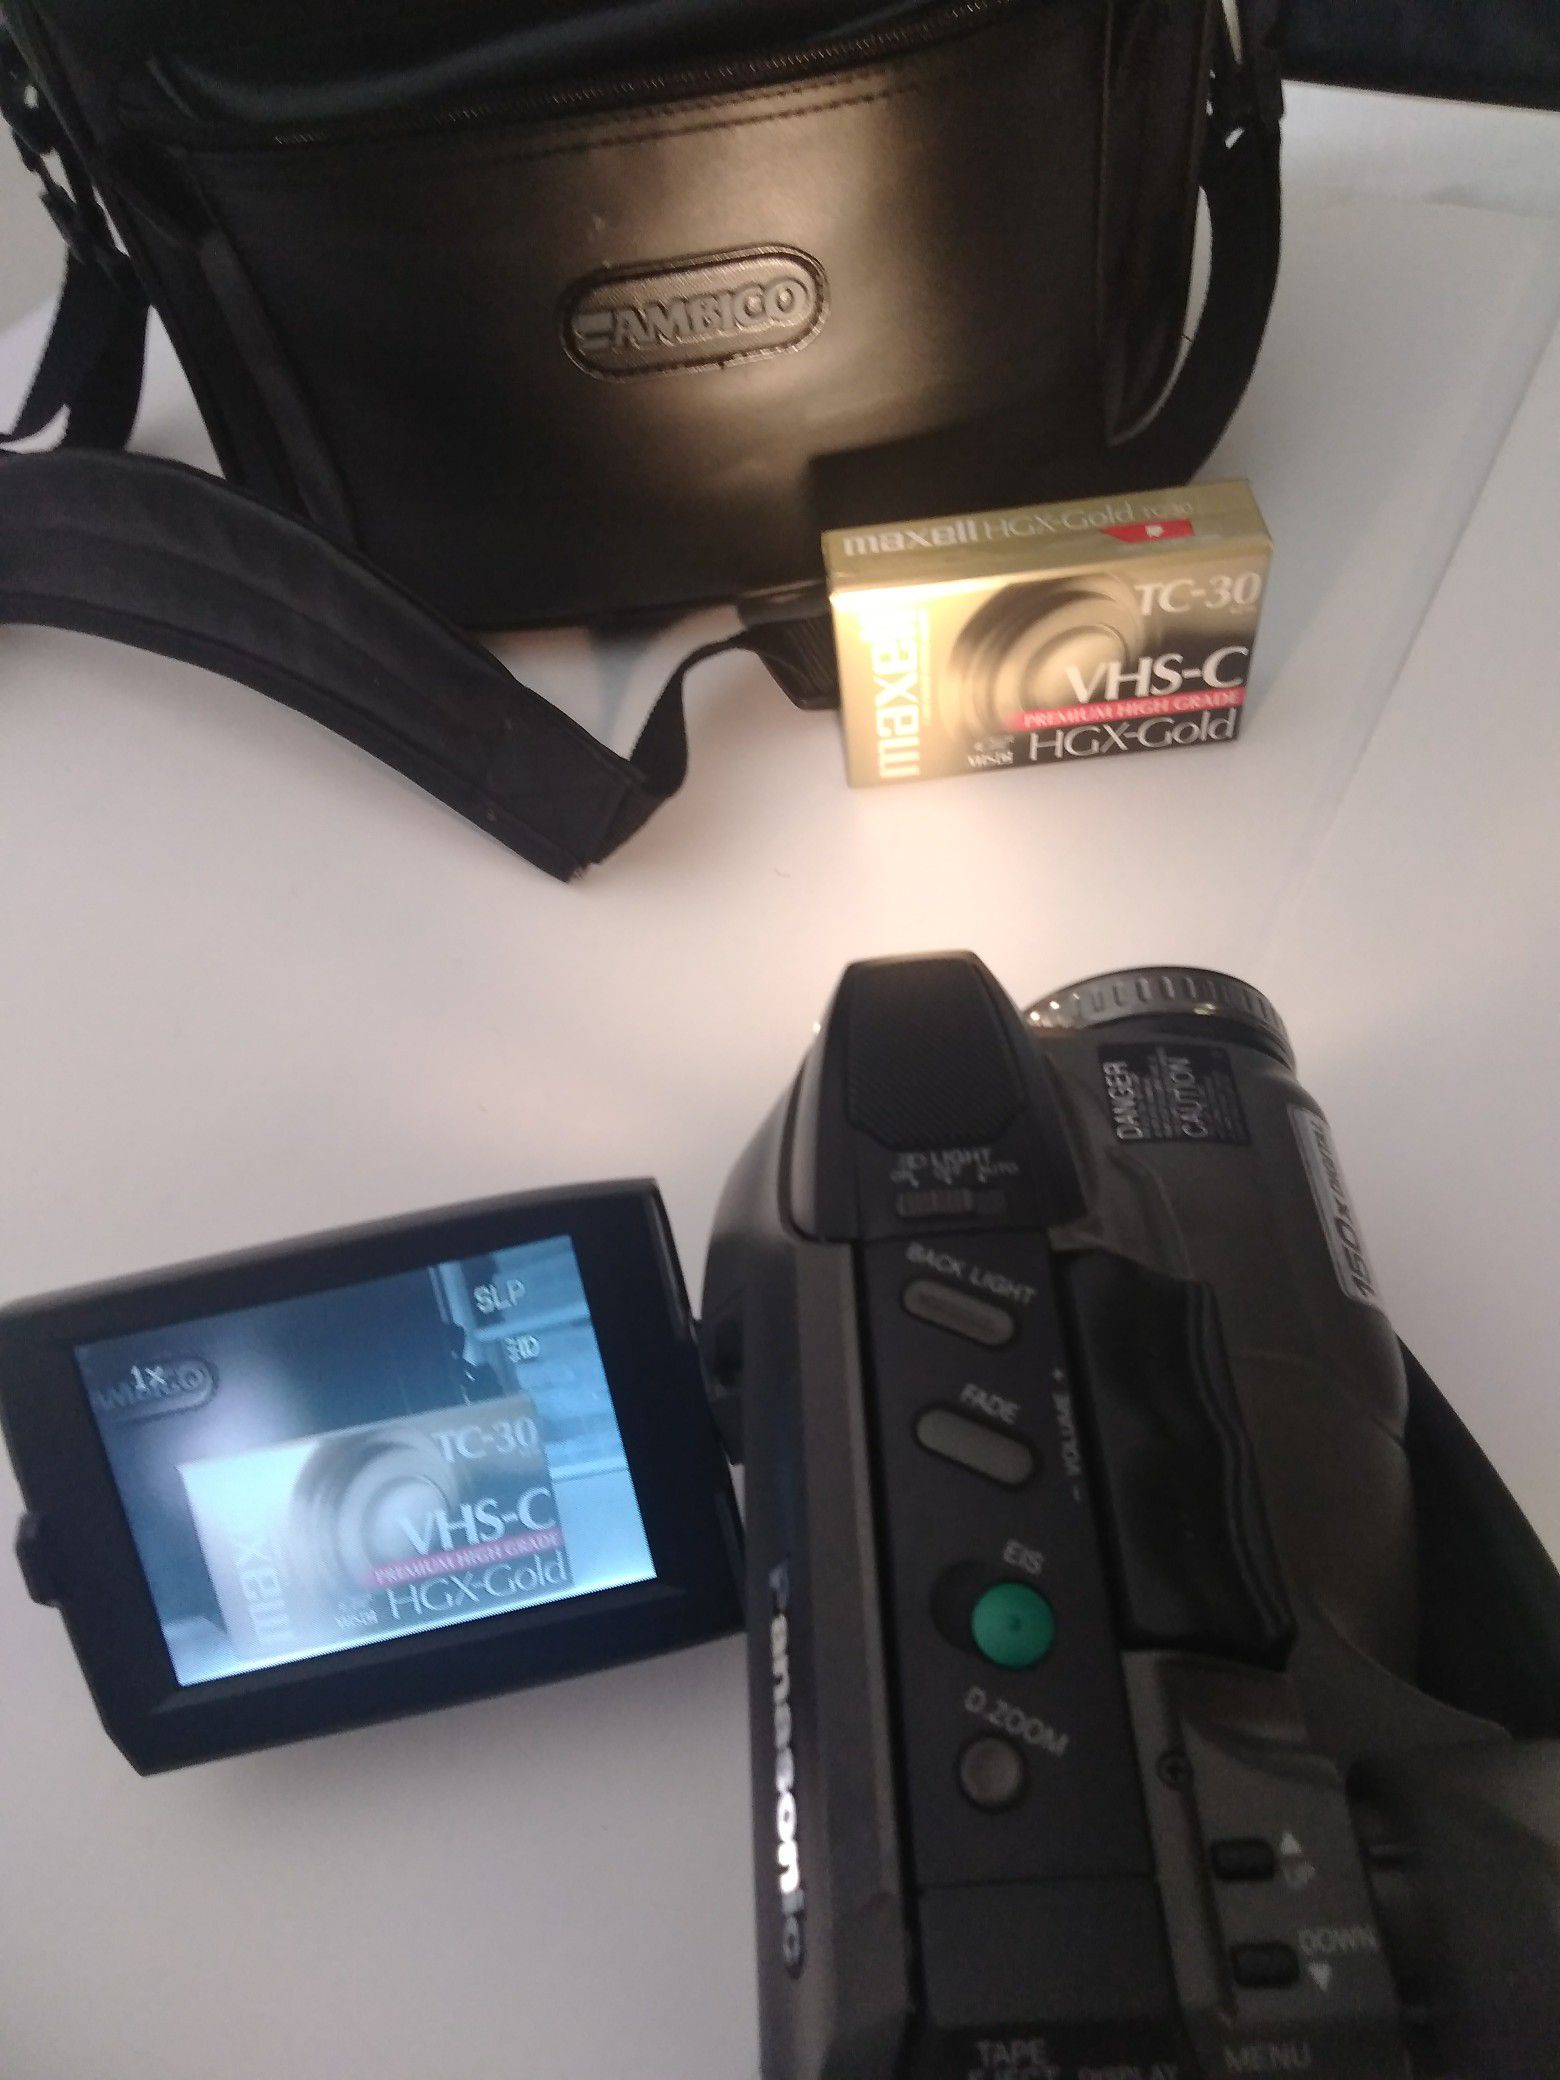 Panasonic Video Palmcorder w/ bag, battery power pack, extra NEW vhs-c tapes, remote control, manual EUC